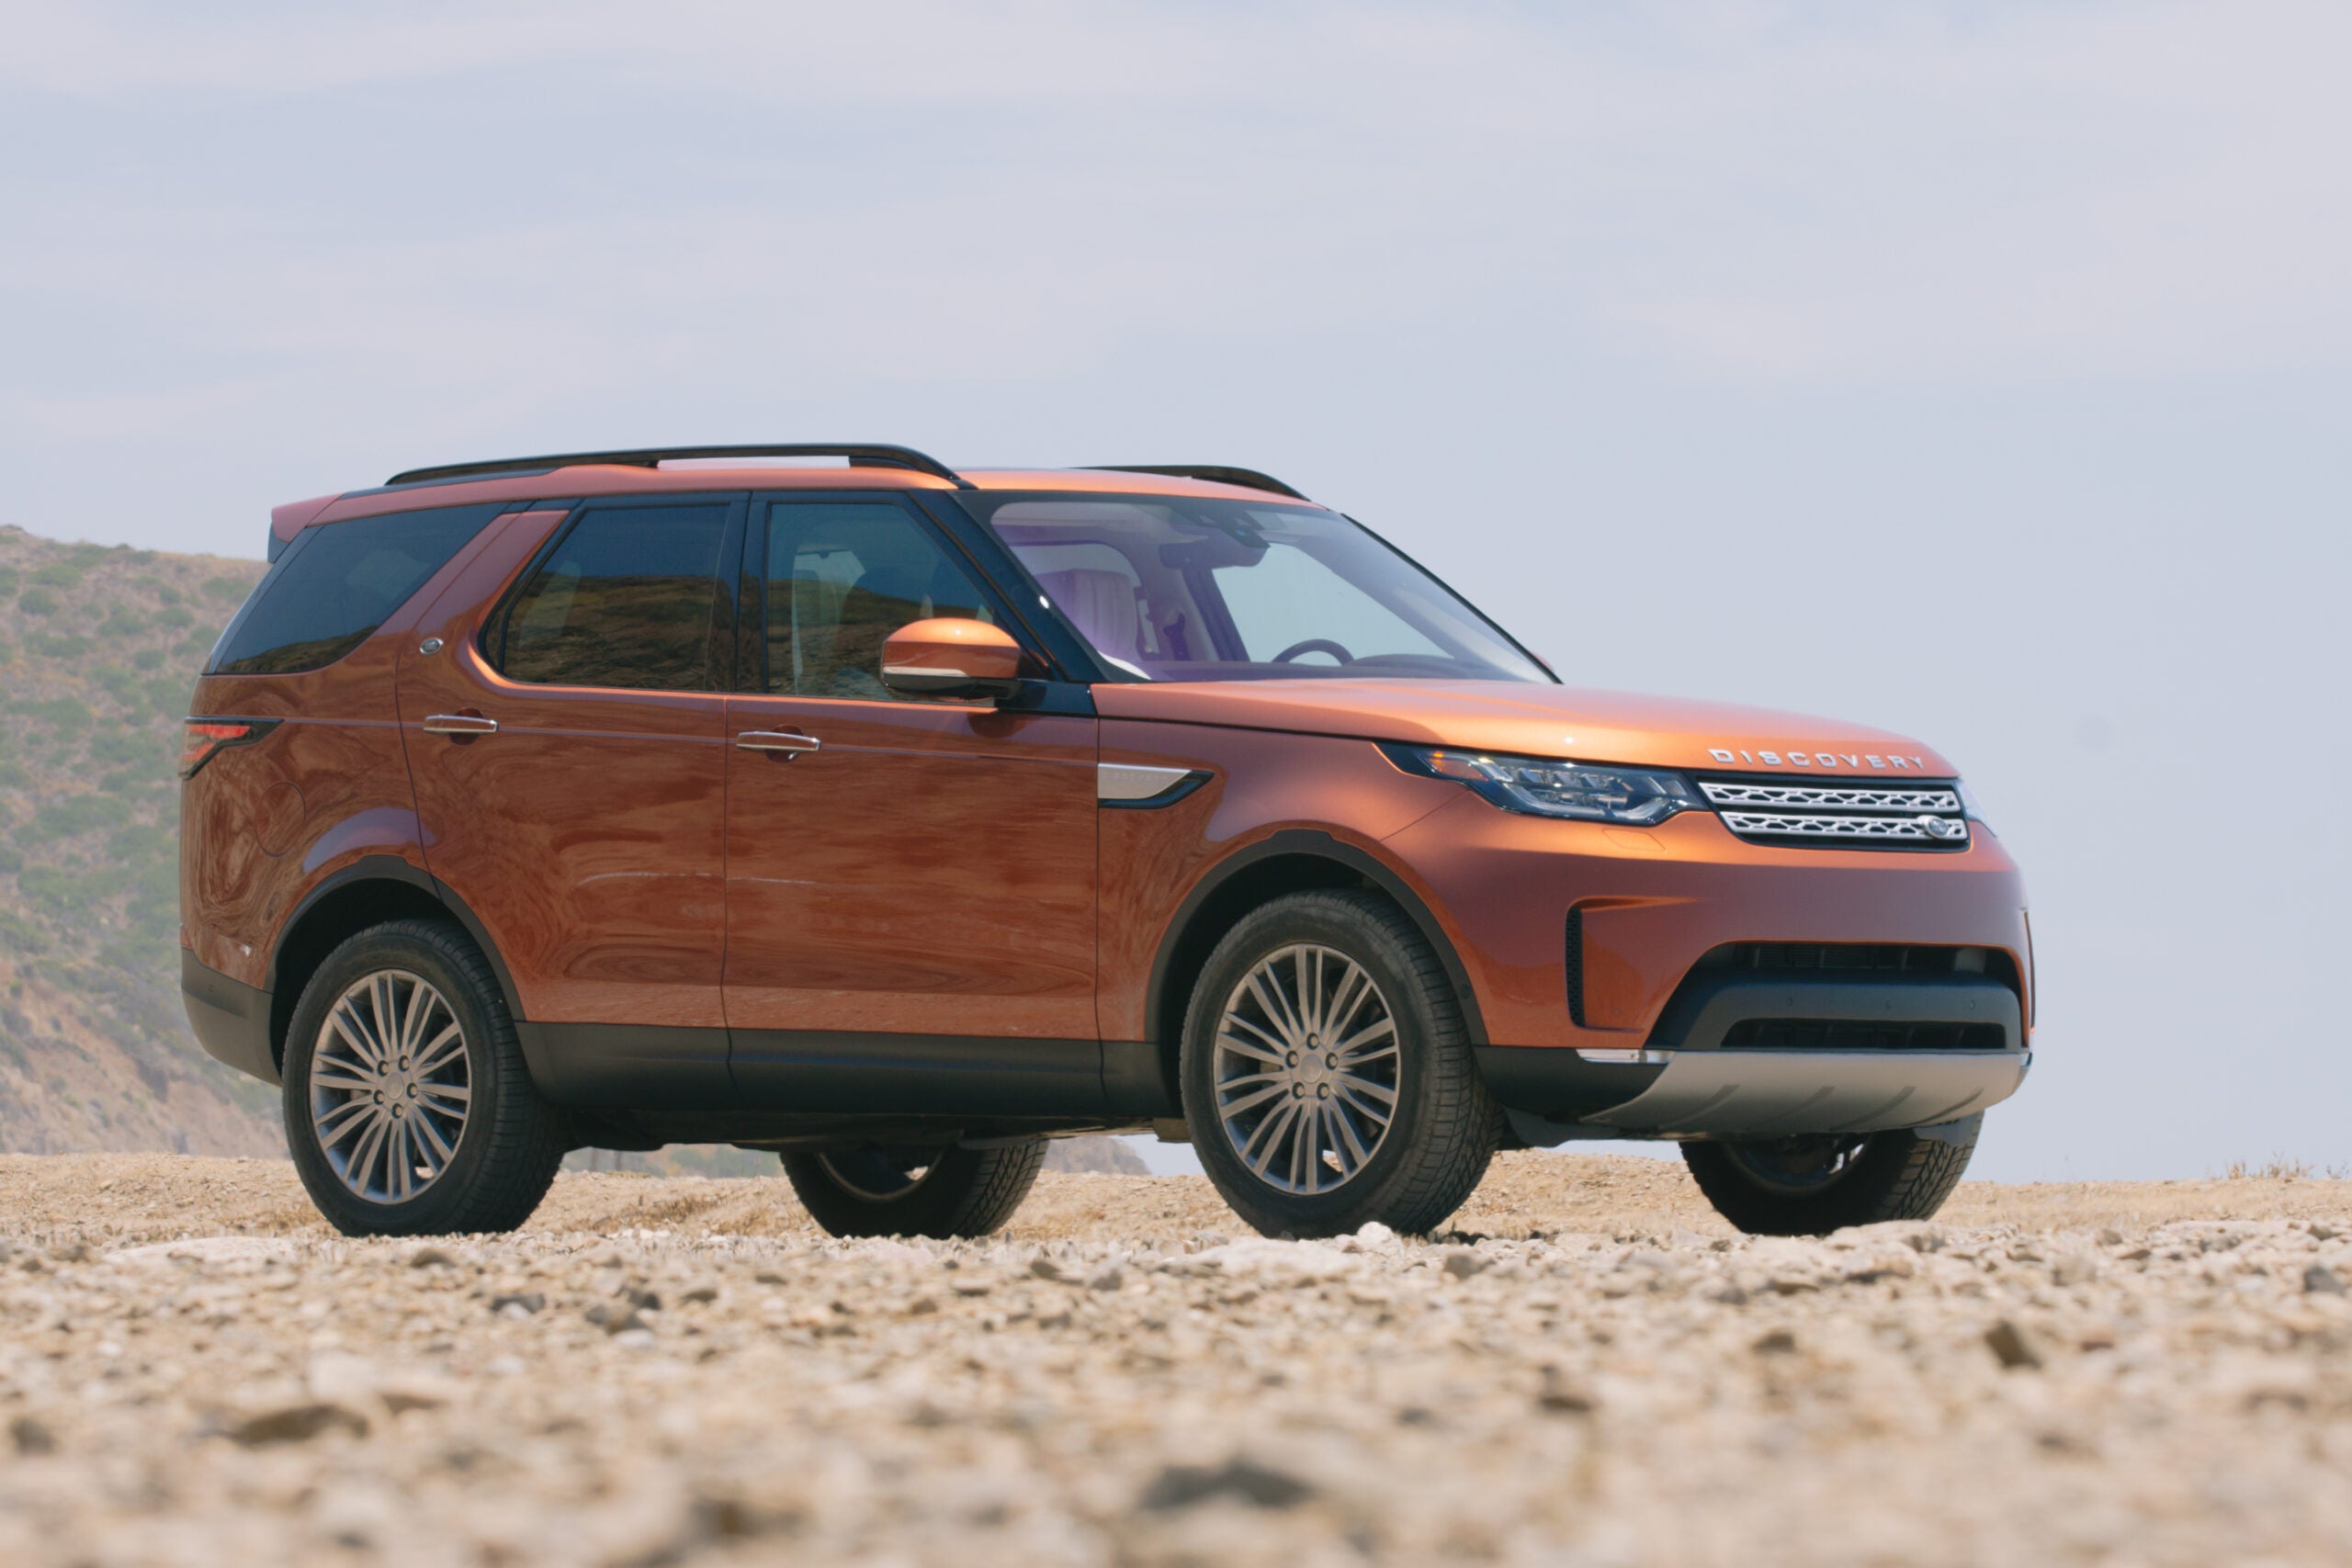 2017 Land Rover Discovery Sport Delivers Ruggedness & Refinement